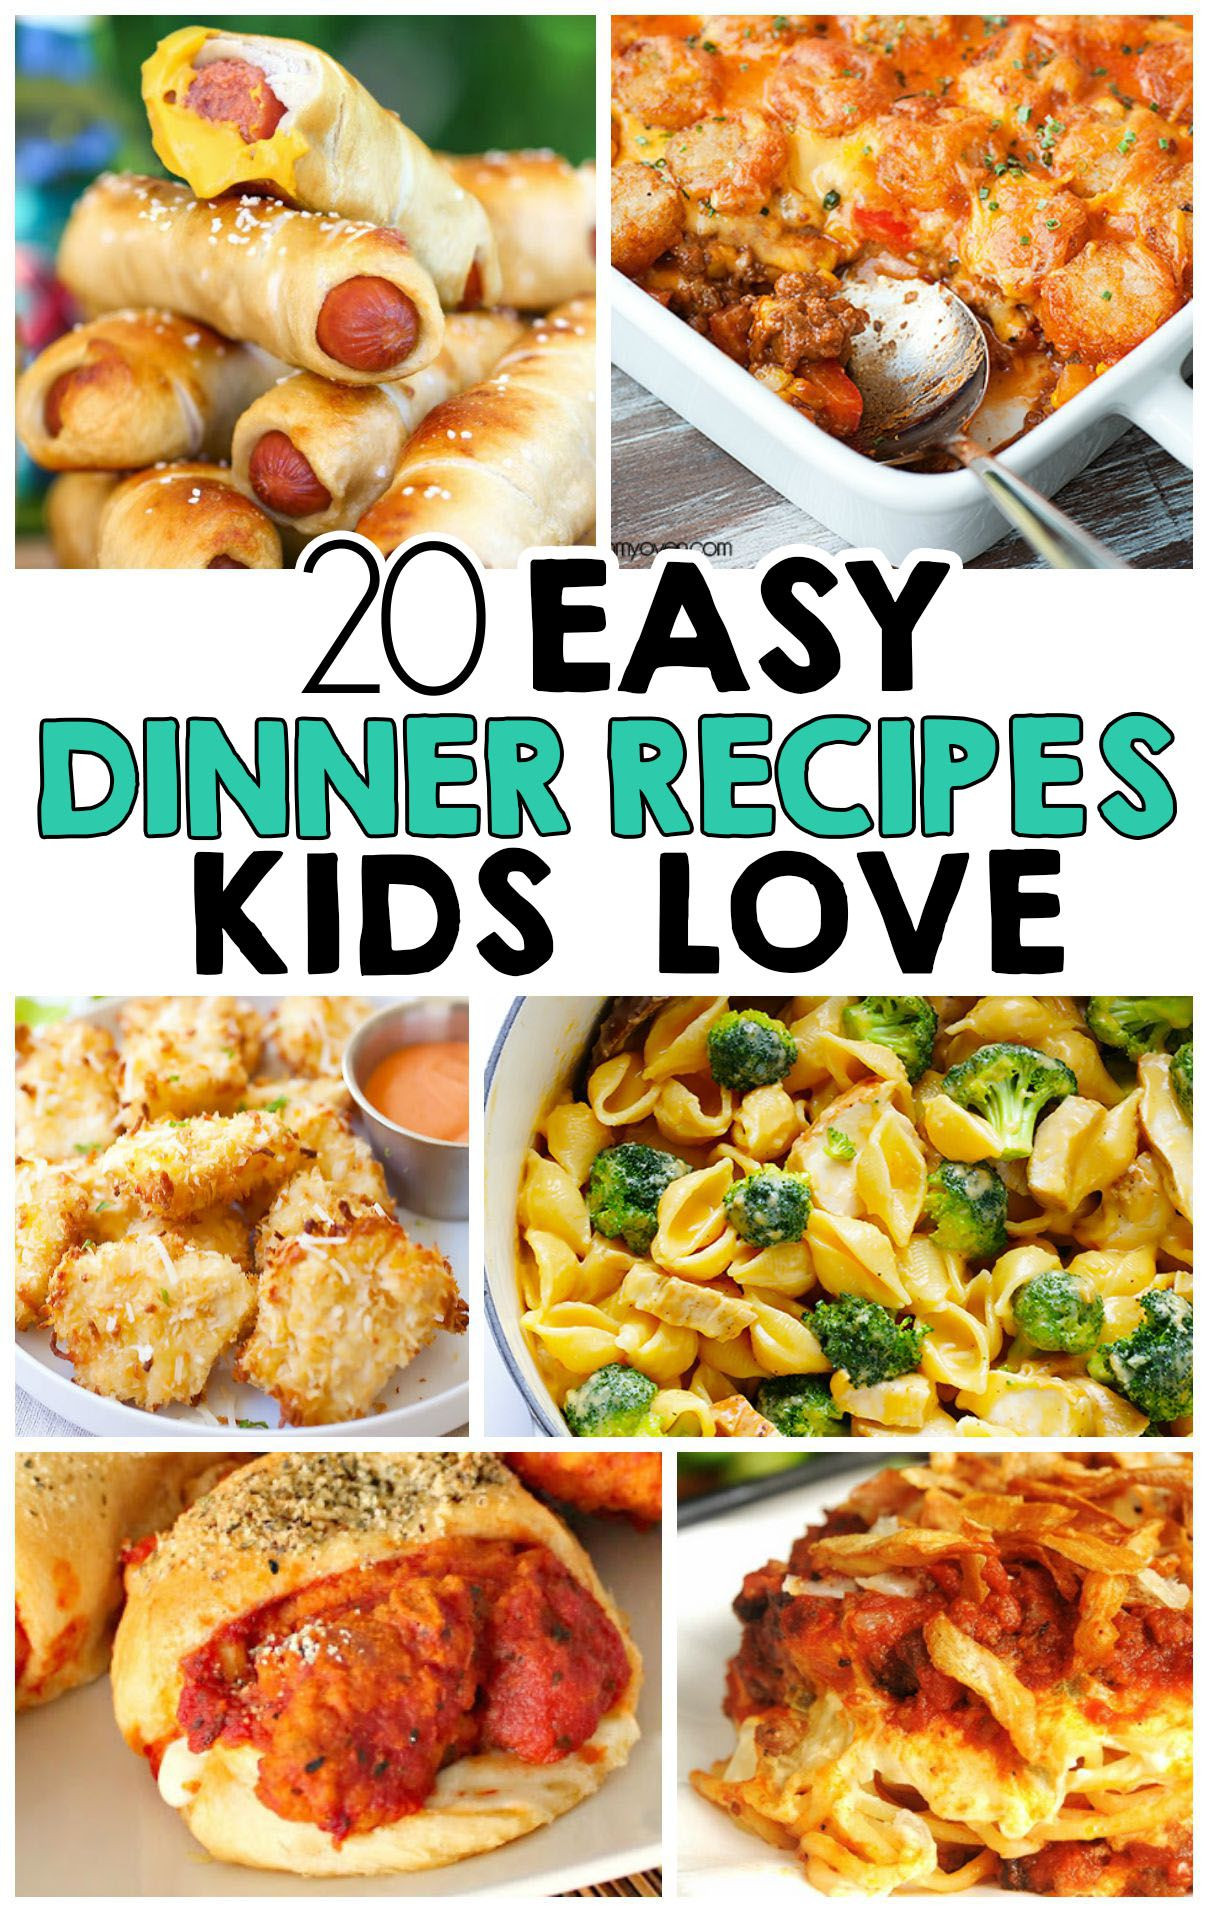 Fun Healthy Dinners For Kids
 20 Easy Dinner Recipes That Kids Love